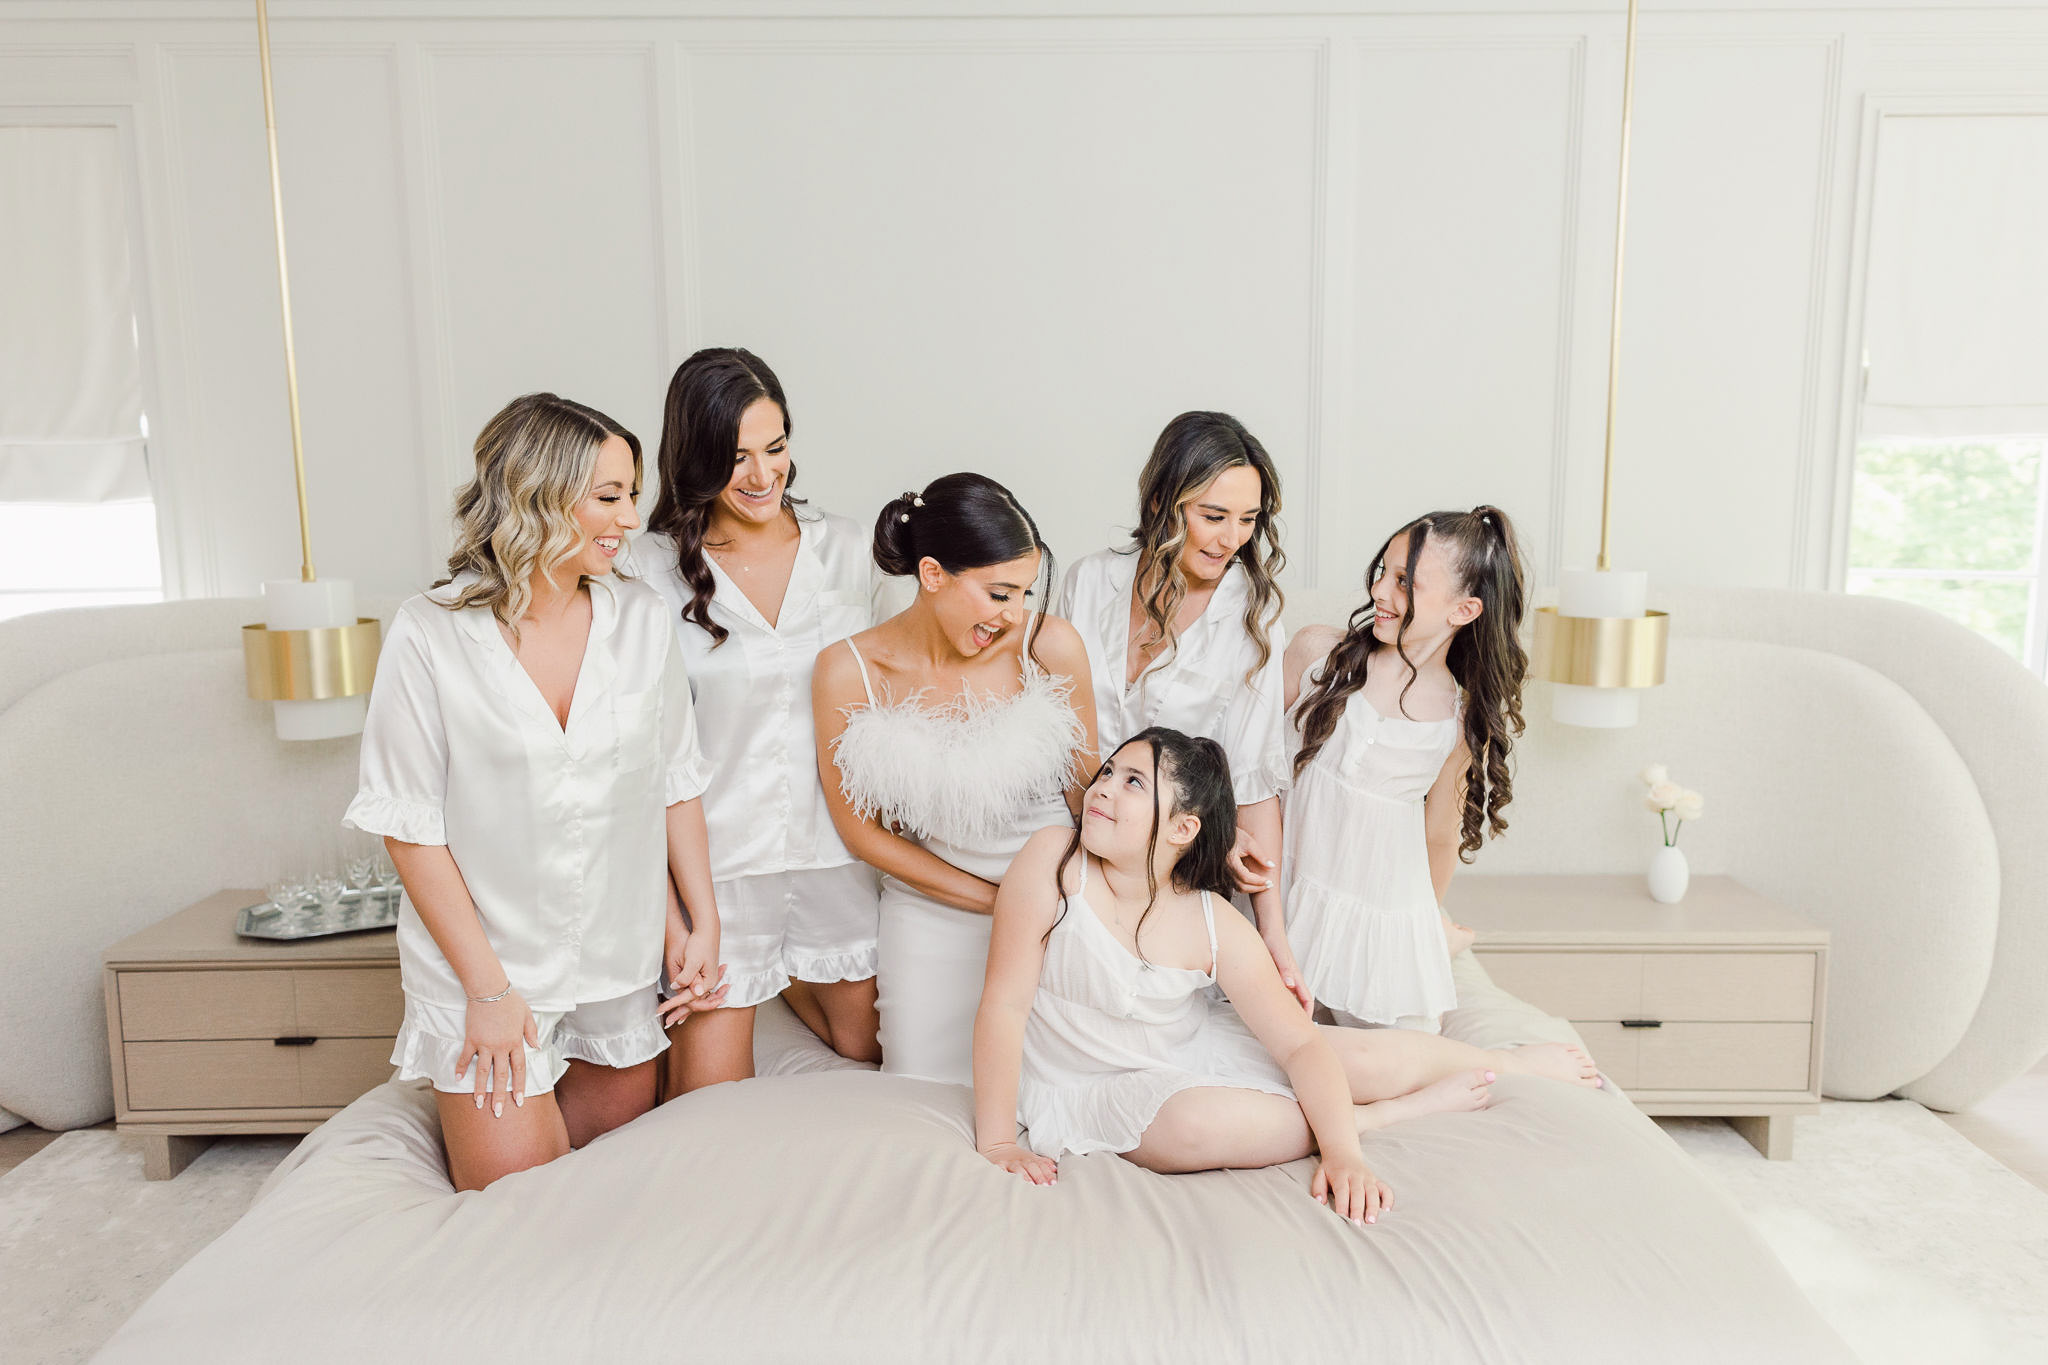 Bridesmaids posing for a photo on a bed.